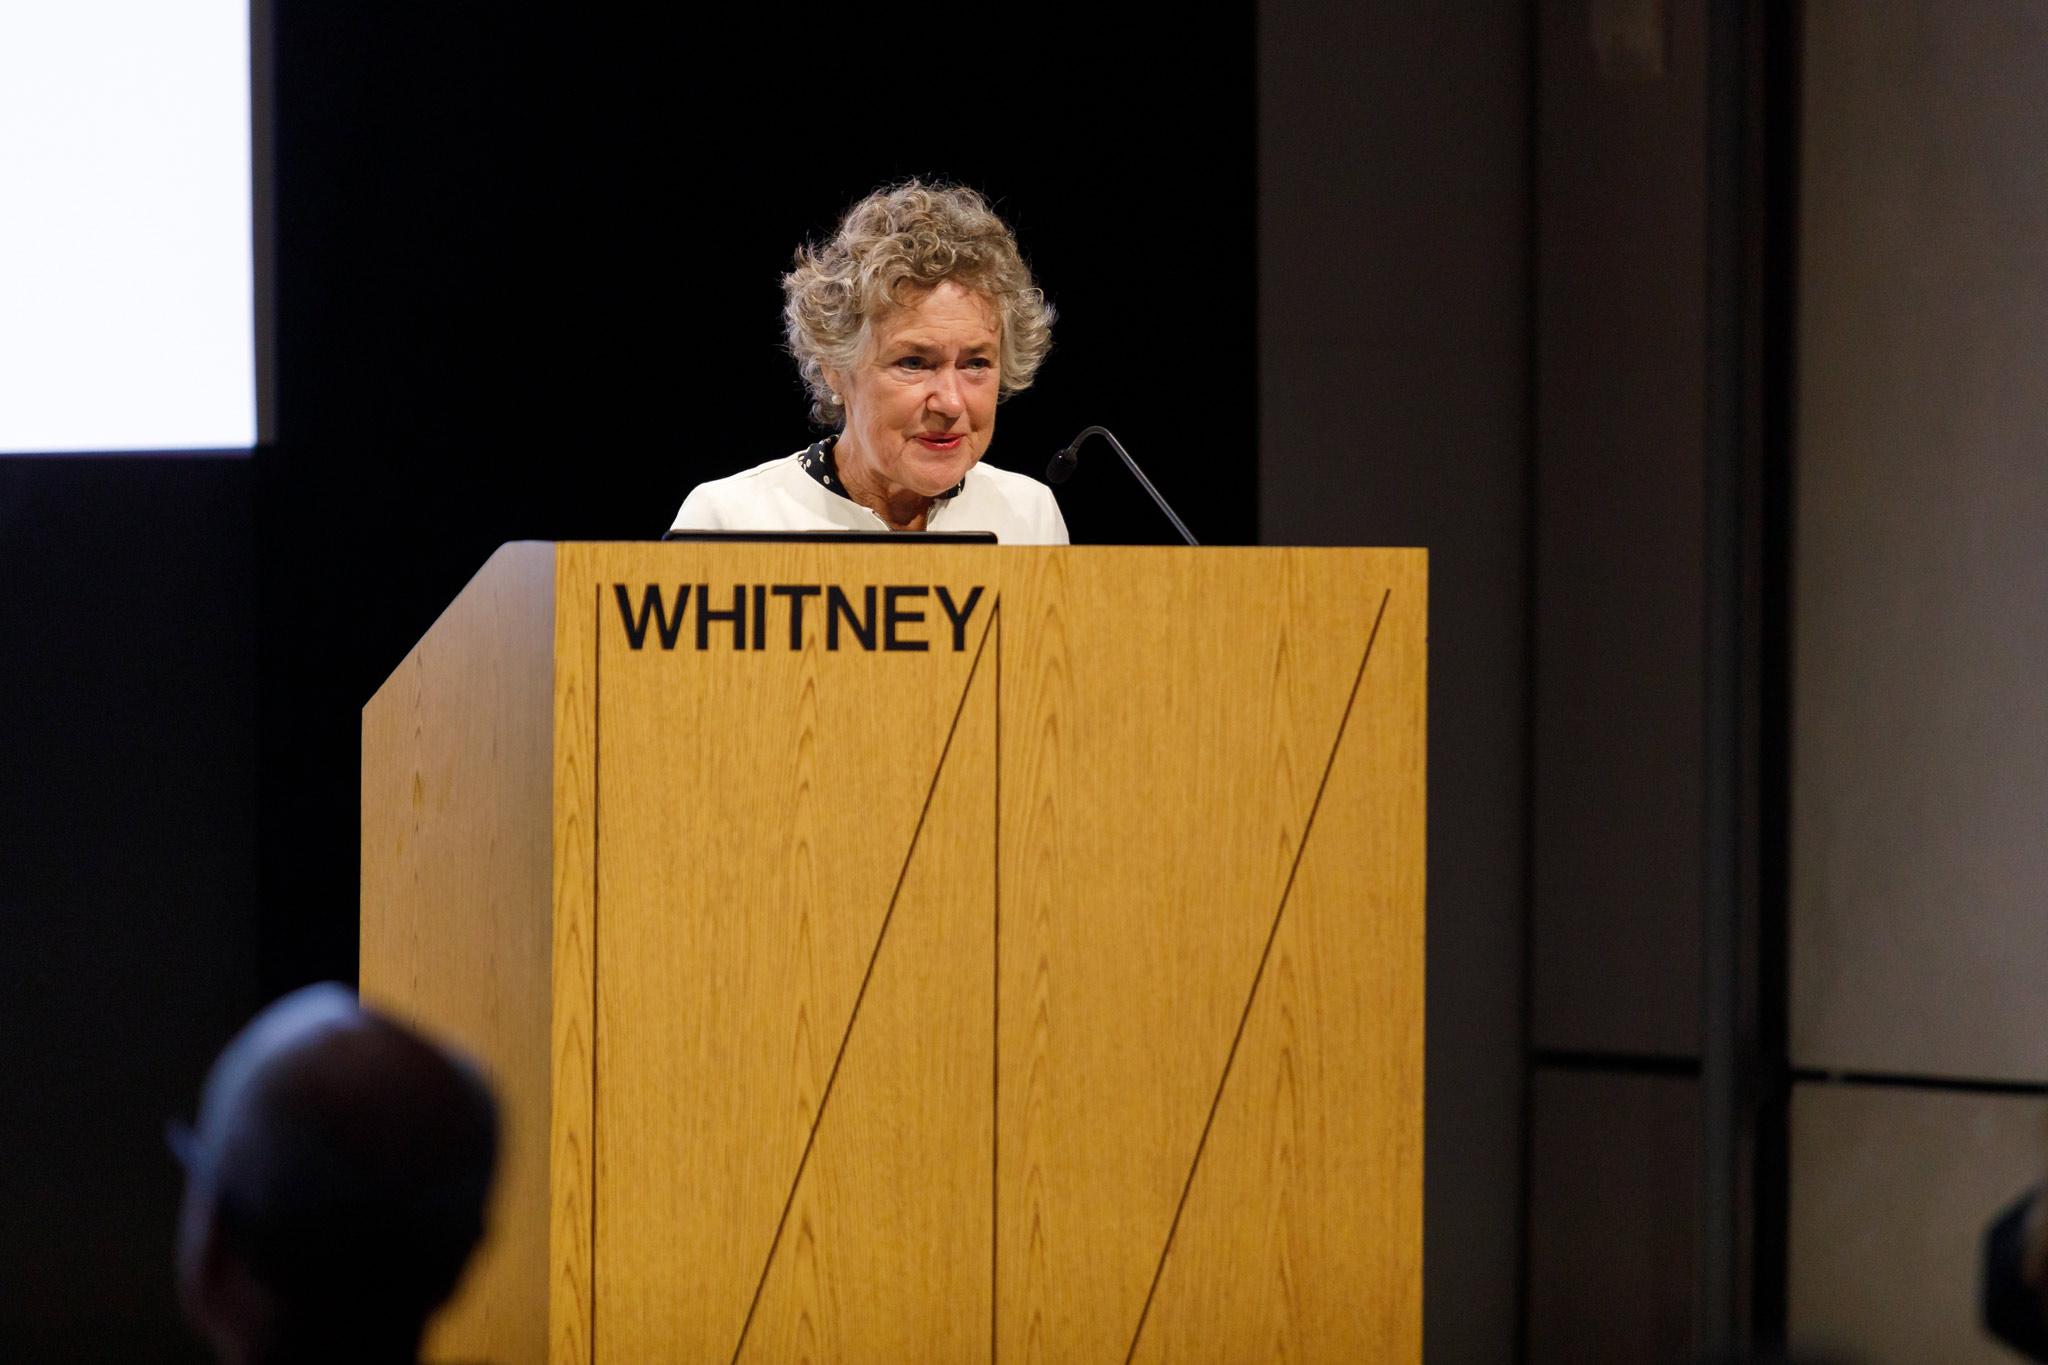 Anne Wagner at the The 2022 Holt/Smithson Foundation Annual Lecture at the Whitney Museum of American Art